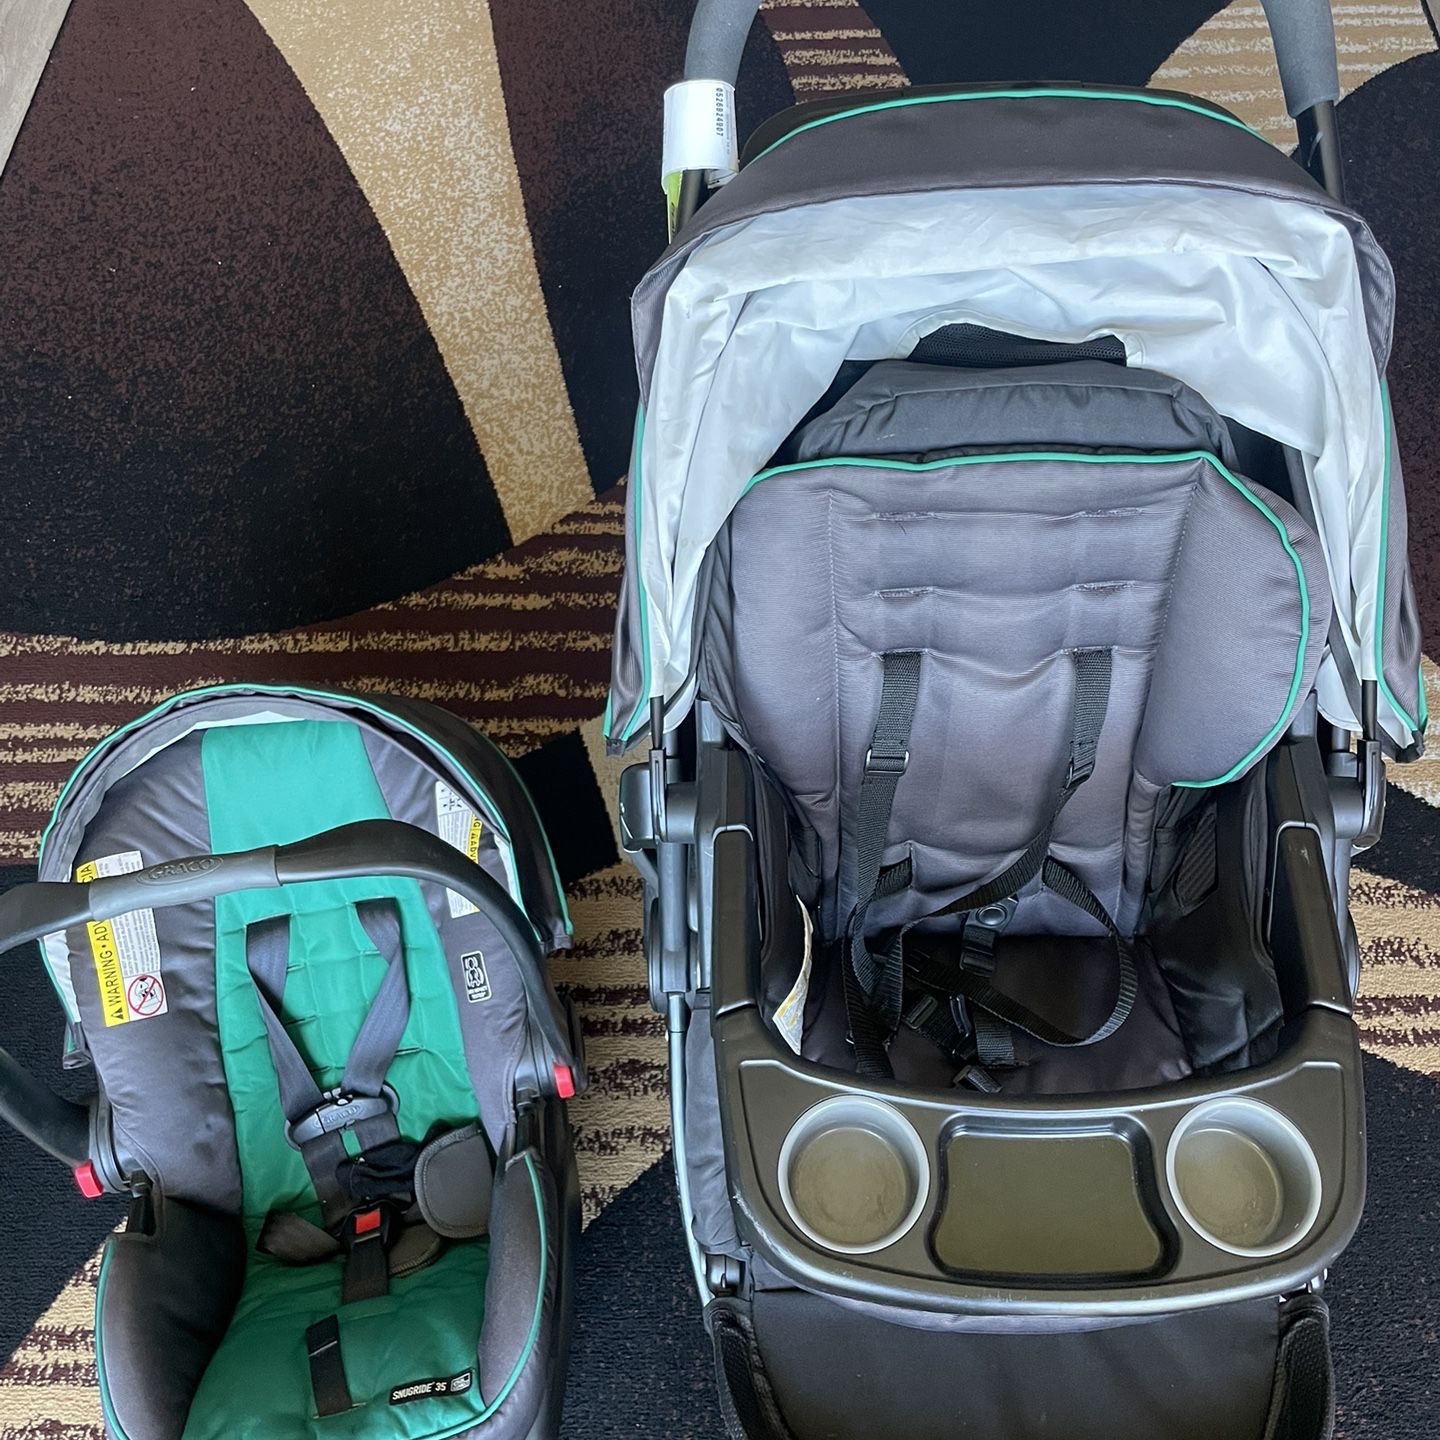 Graco Click Connect Travel System For Newborn/Infants